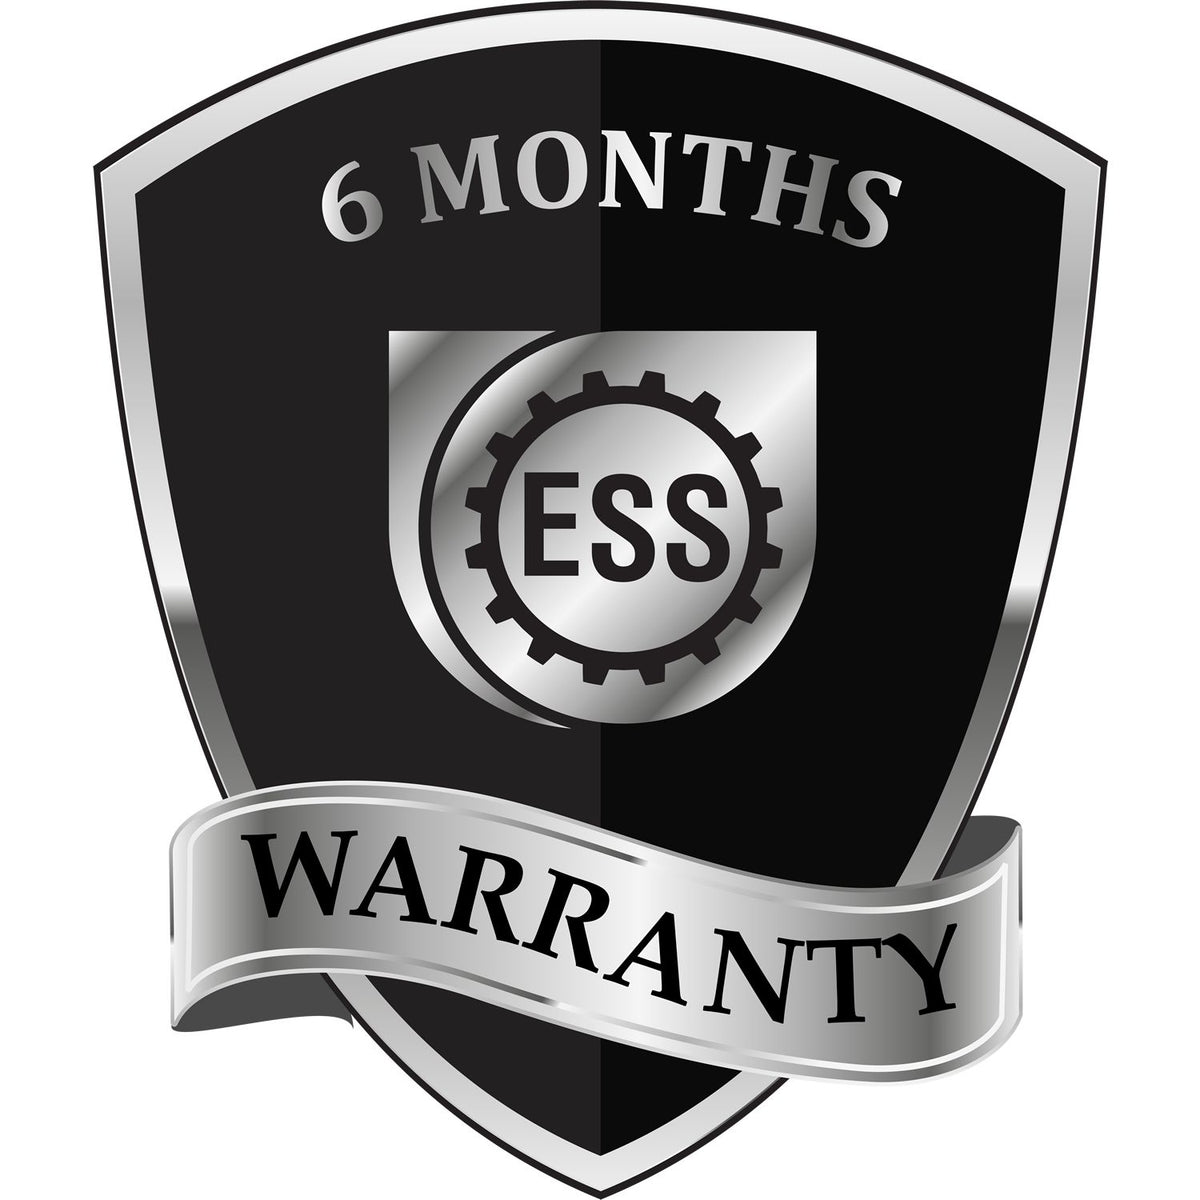 A black and silver badge or emblem showing warranty information for the Self-Inking Montana Geologist Stamp